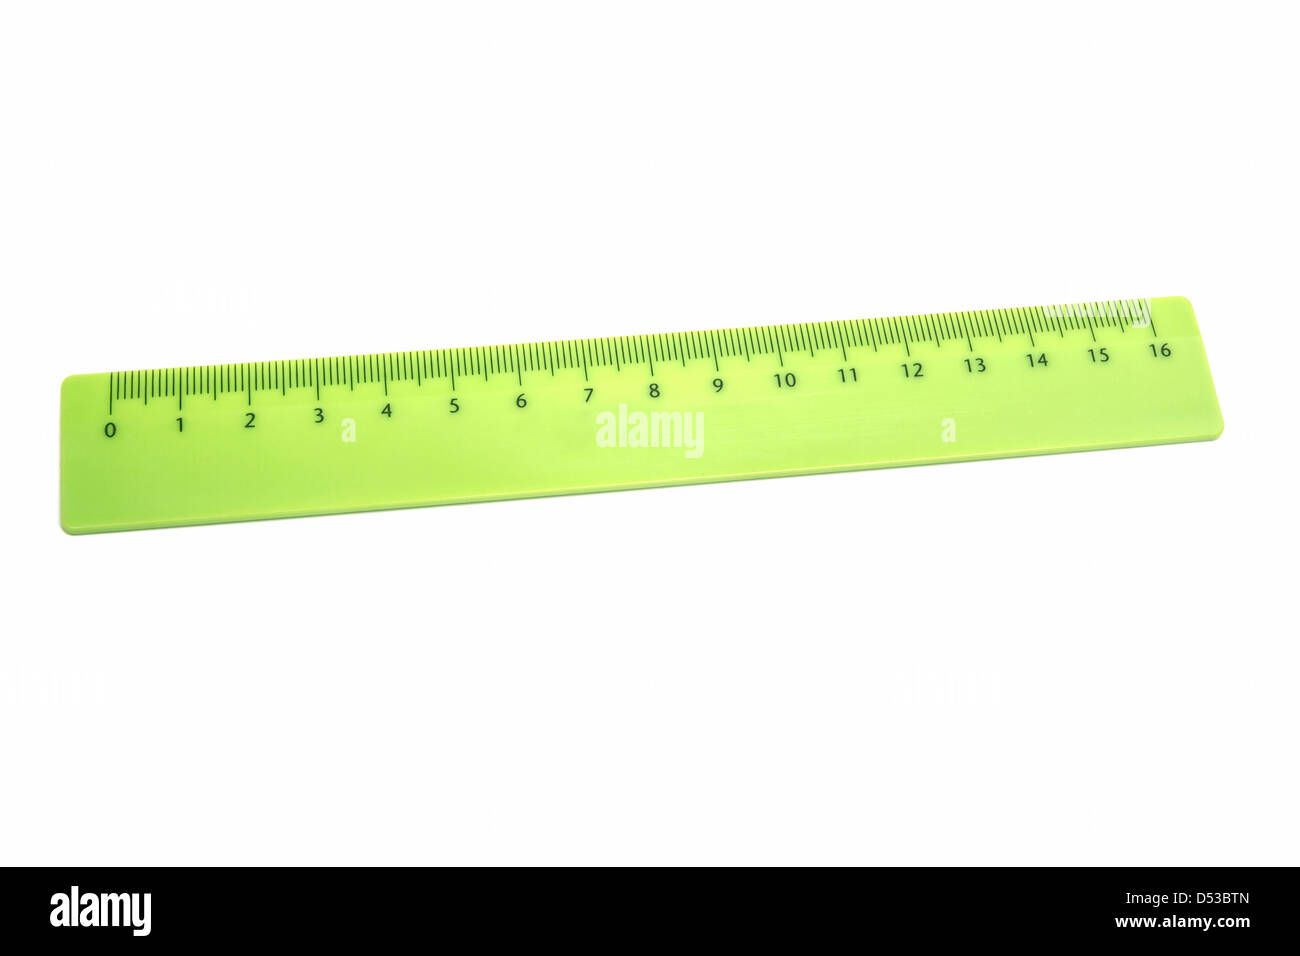 Premium Vector  Pink ruler measurement scale tool. measuring math tool  accessories. children's cute stationery